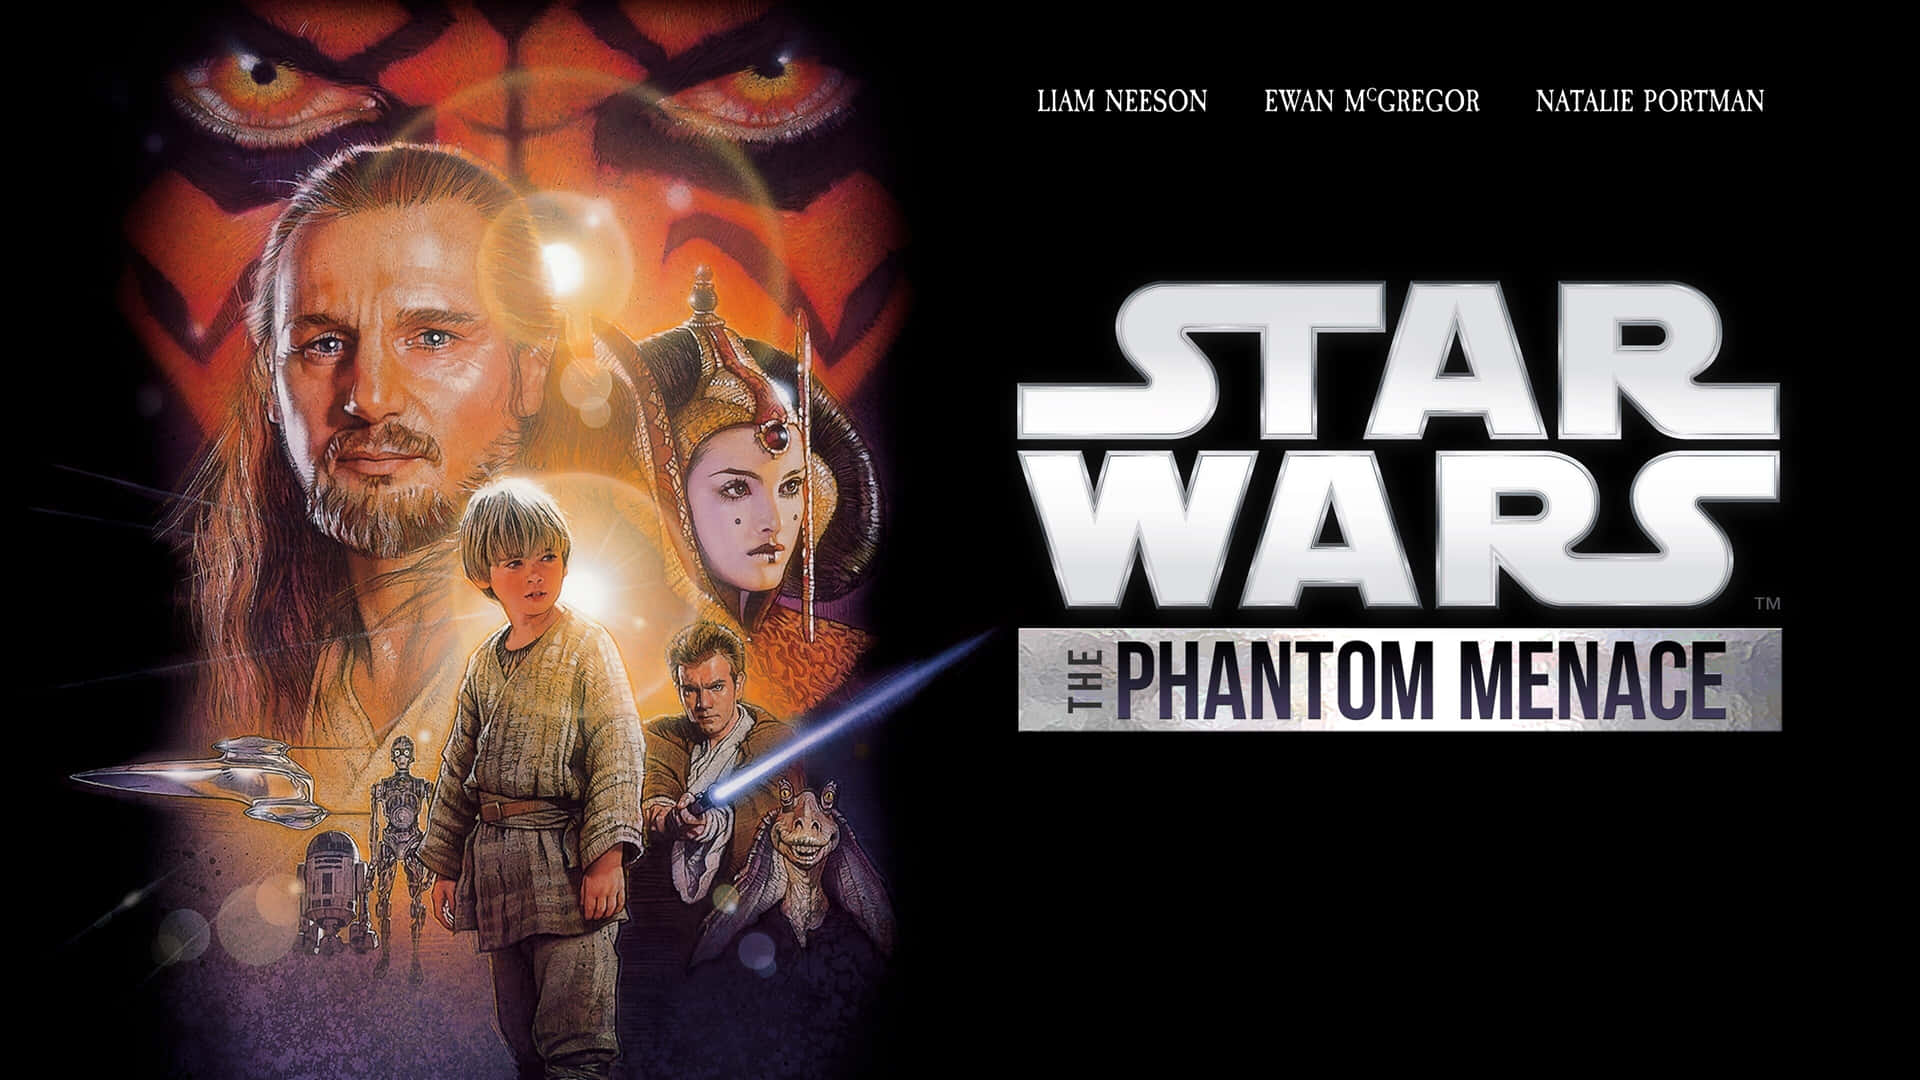 An Iconic Scene from the Epic Star Wars Film 'The Phantom Menace' Wallpaper